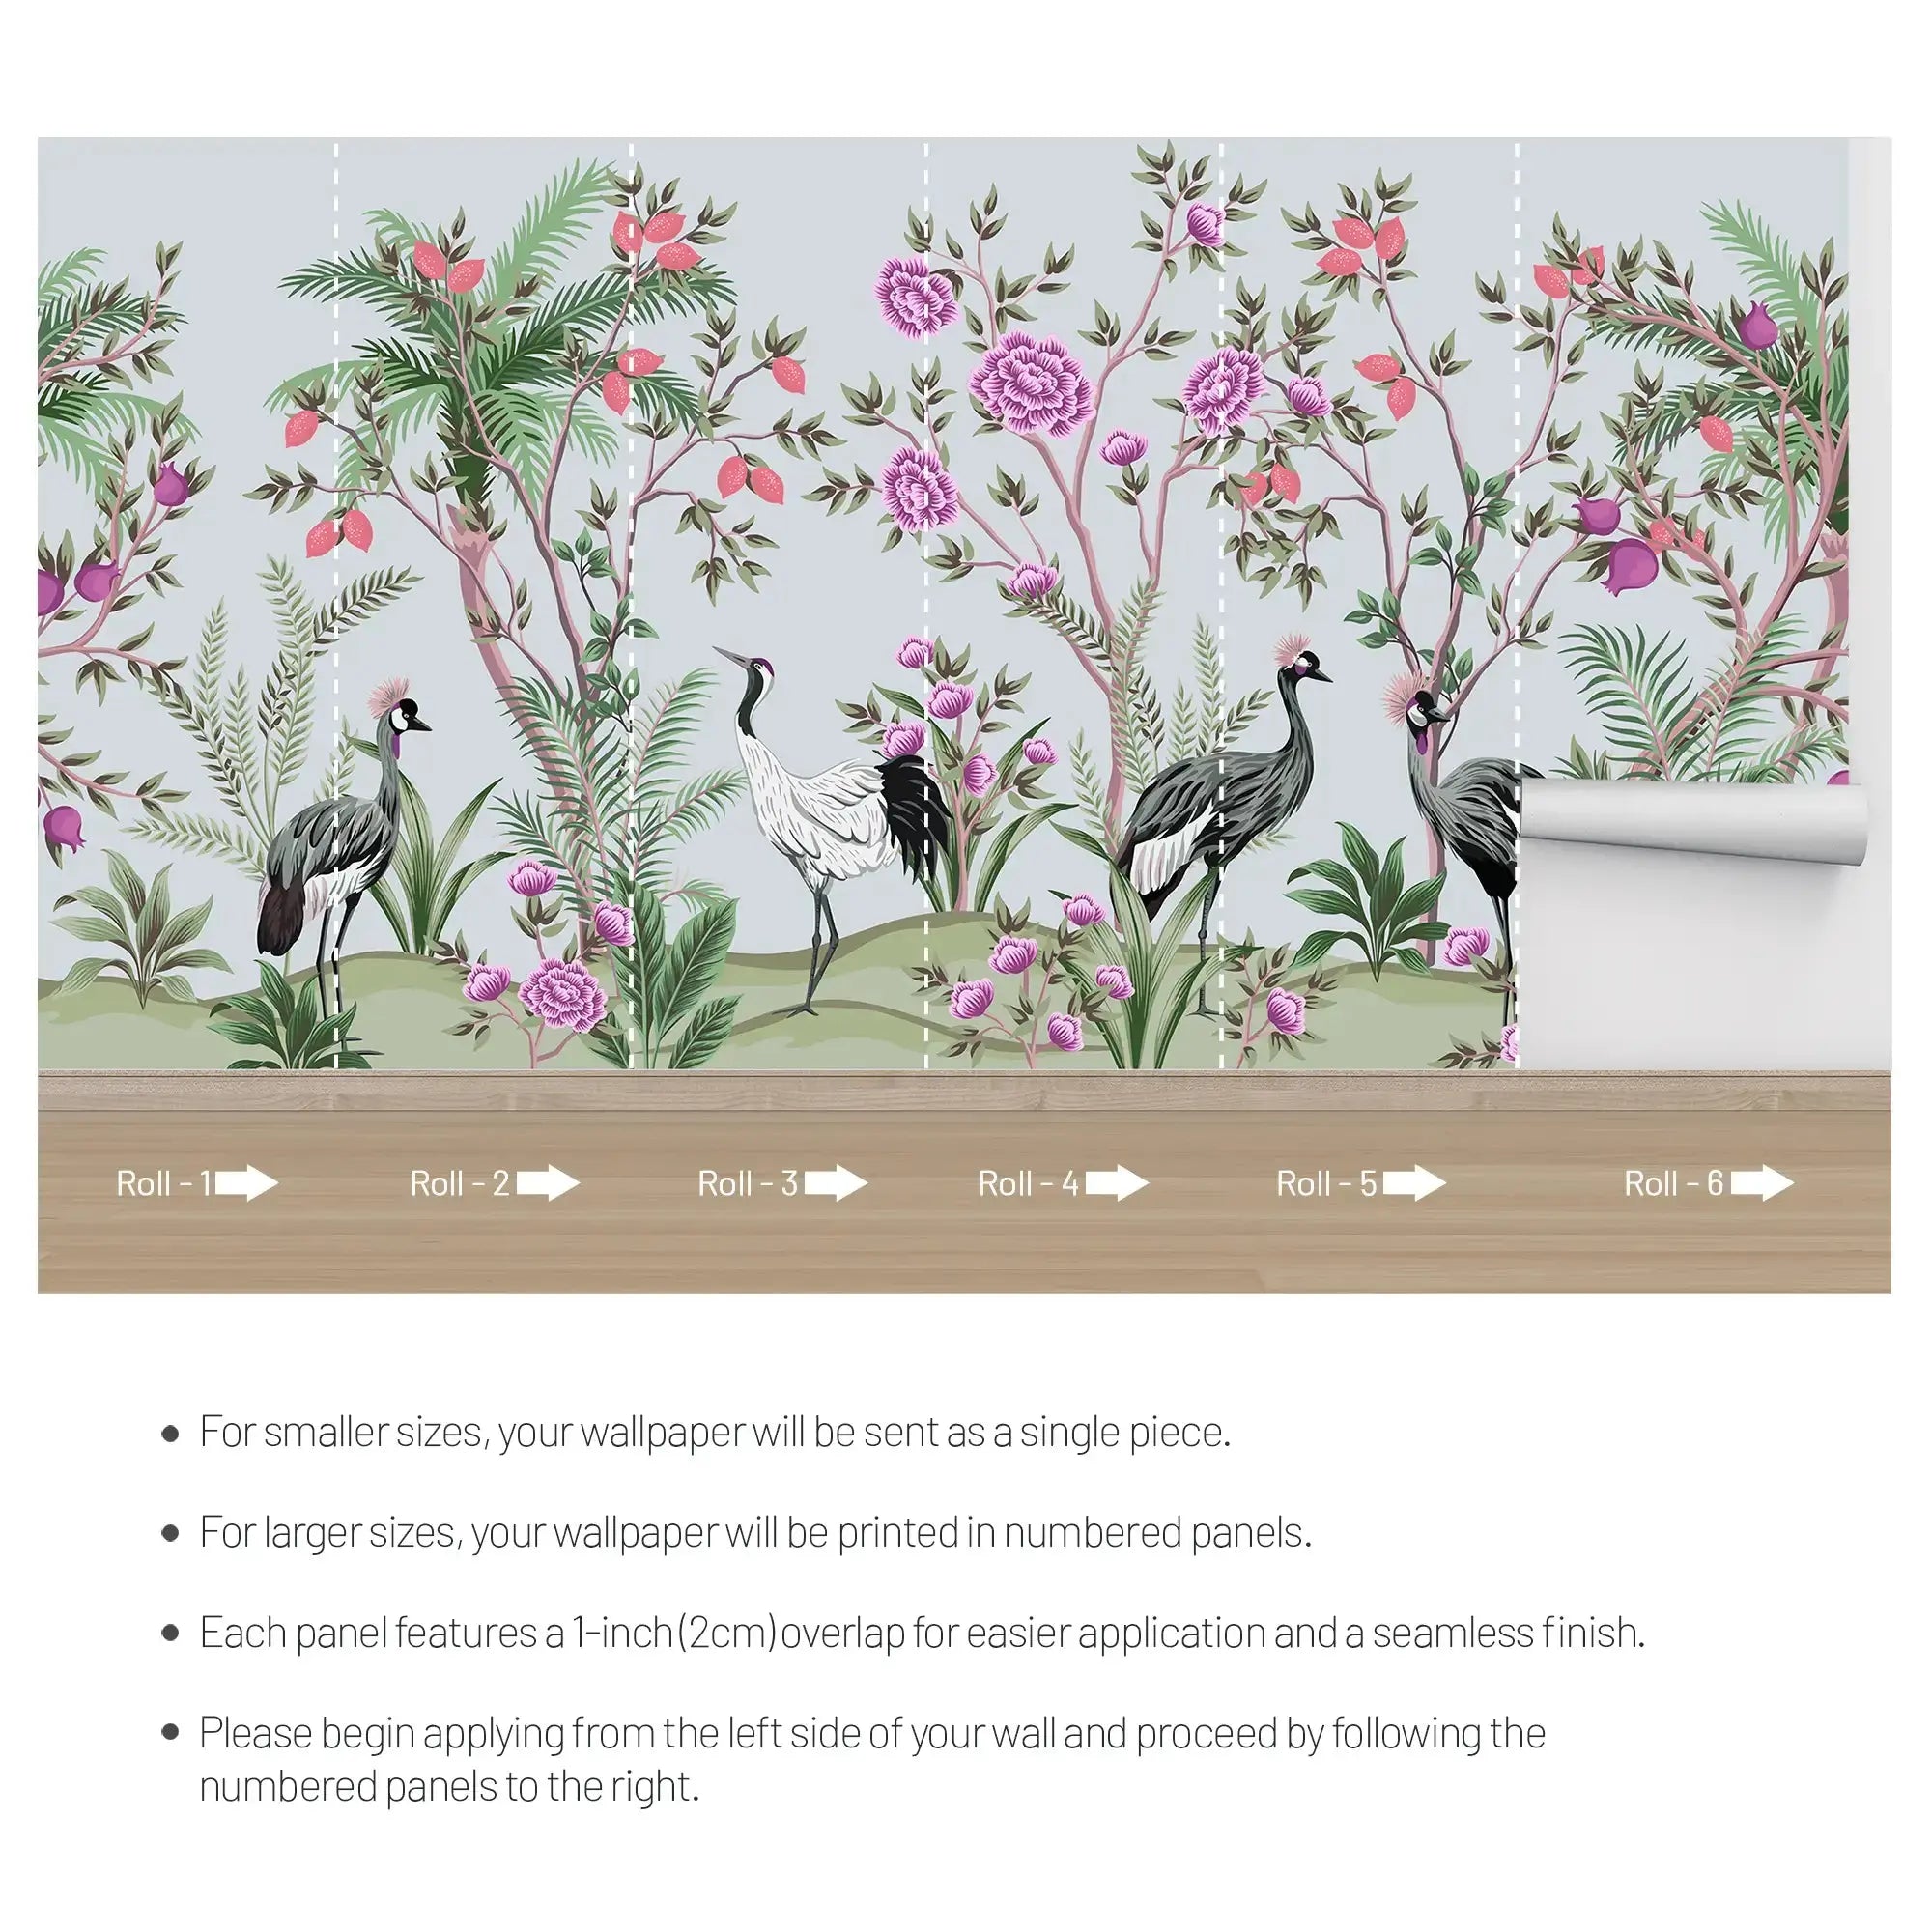 3107-B / Peelable Asian Wallpaper - Oriental Style with Cranes and Flowers - Easy Install Wall Mural - Artevella